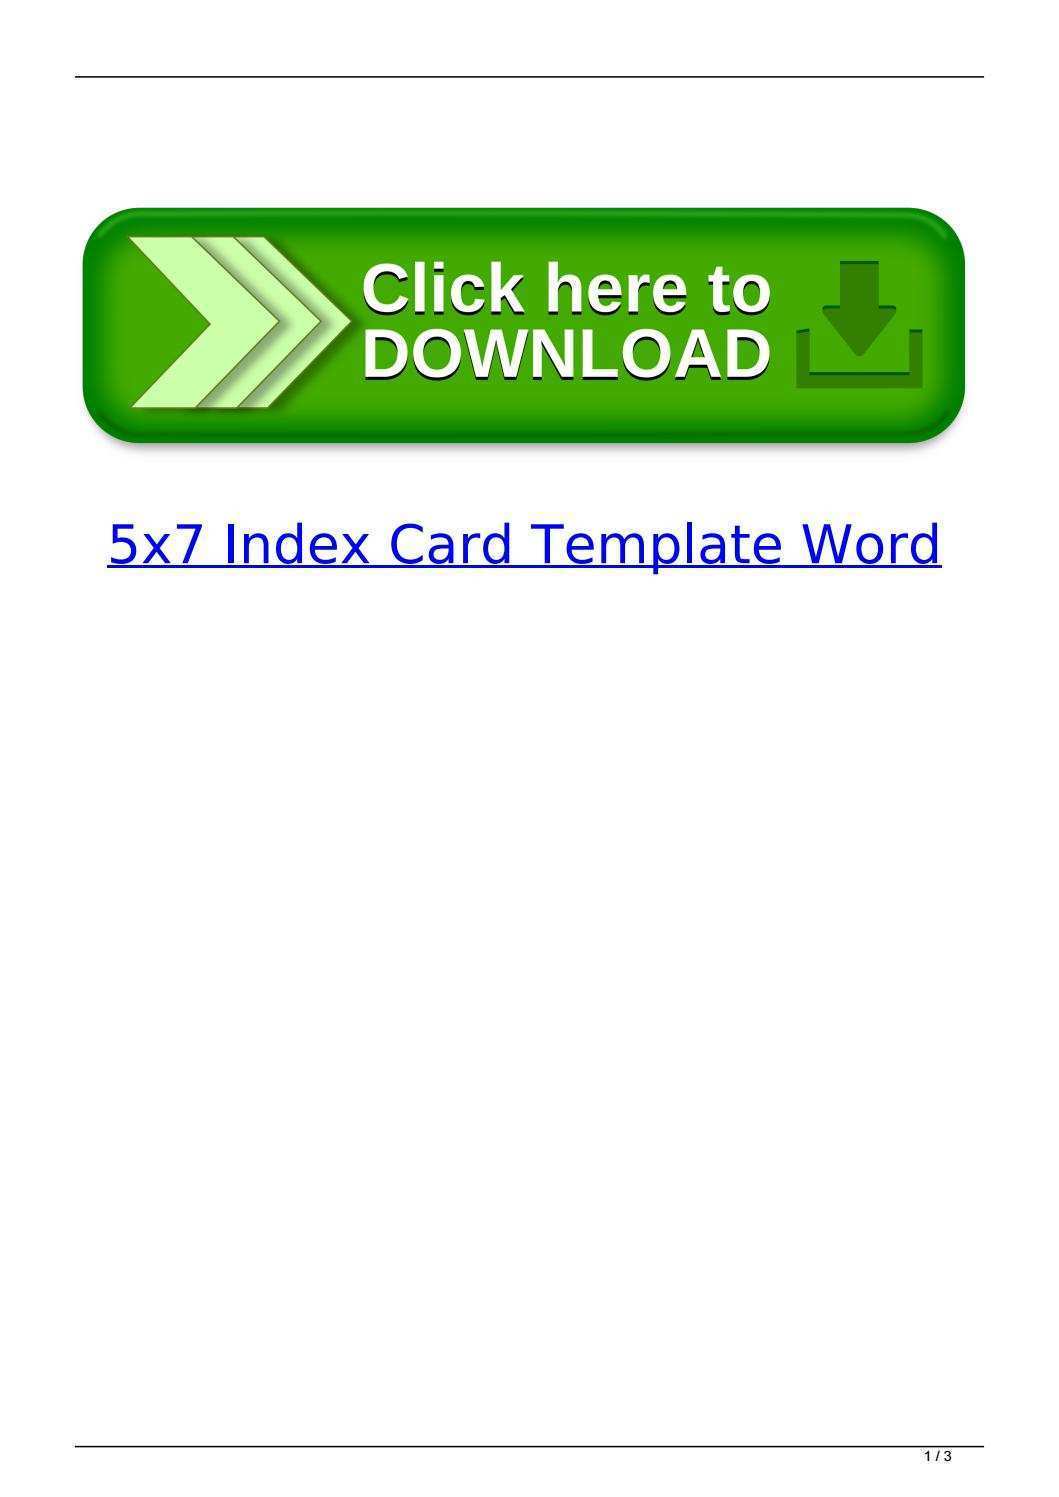 92 Visiting Index Card Template Word 2013 For Free by Index Card Template Word 2013